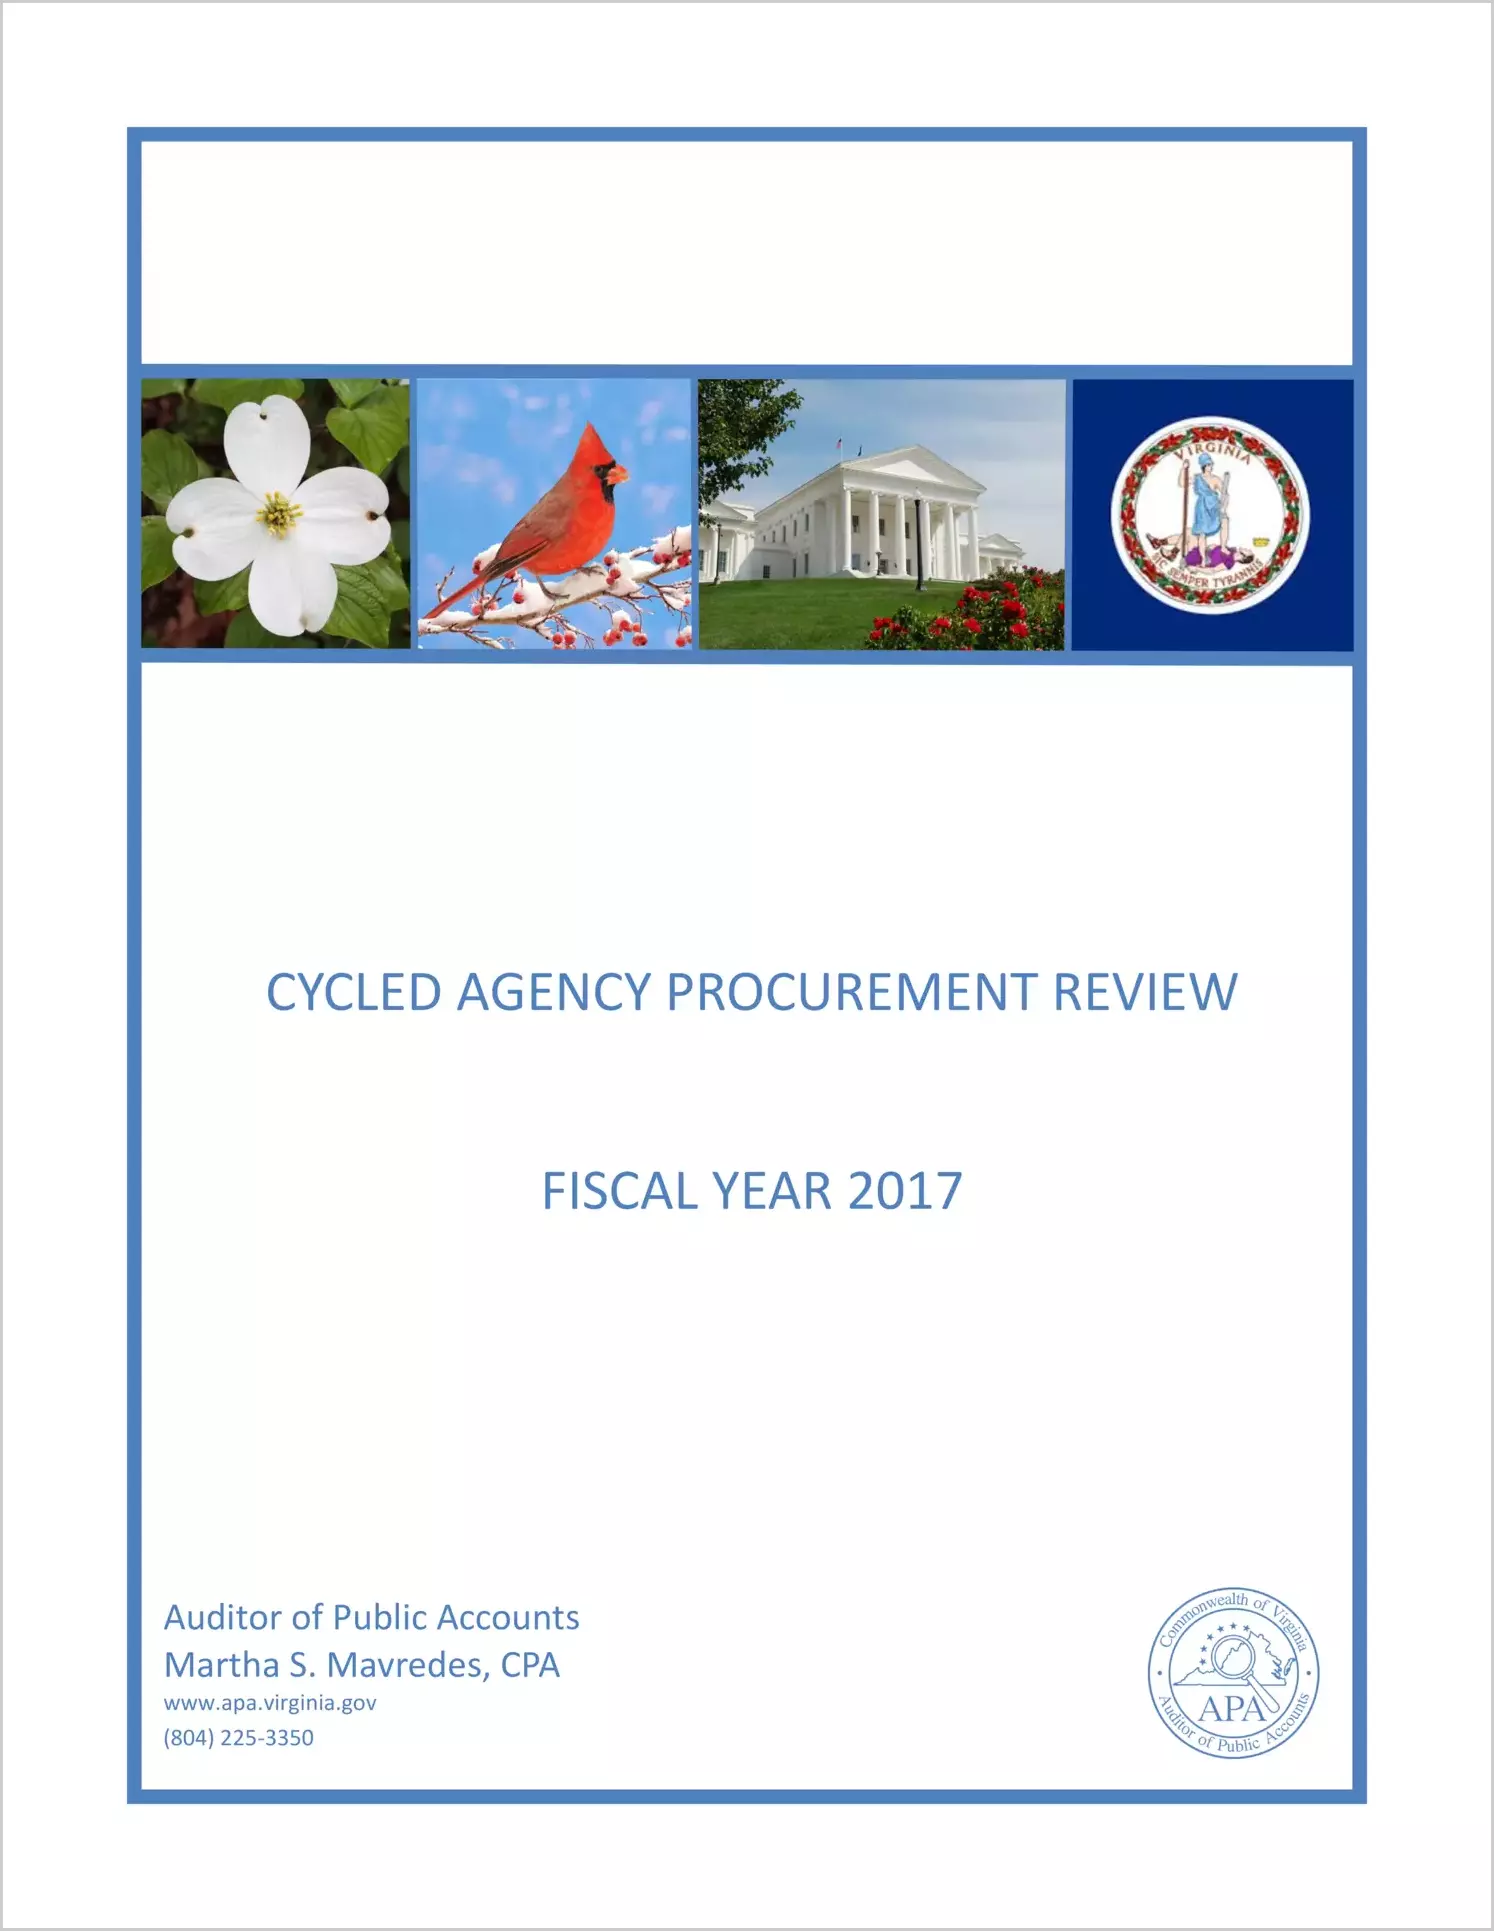 Cycled Agency Procurement Review - Fiscal Year 2017